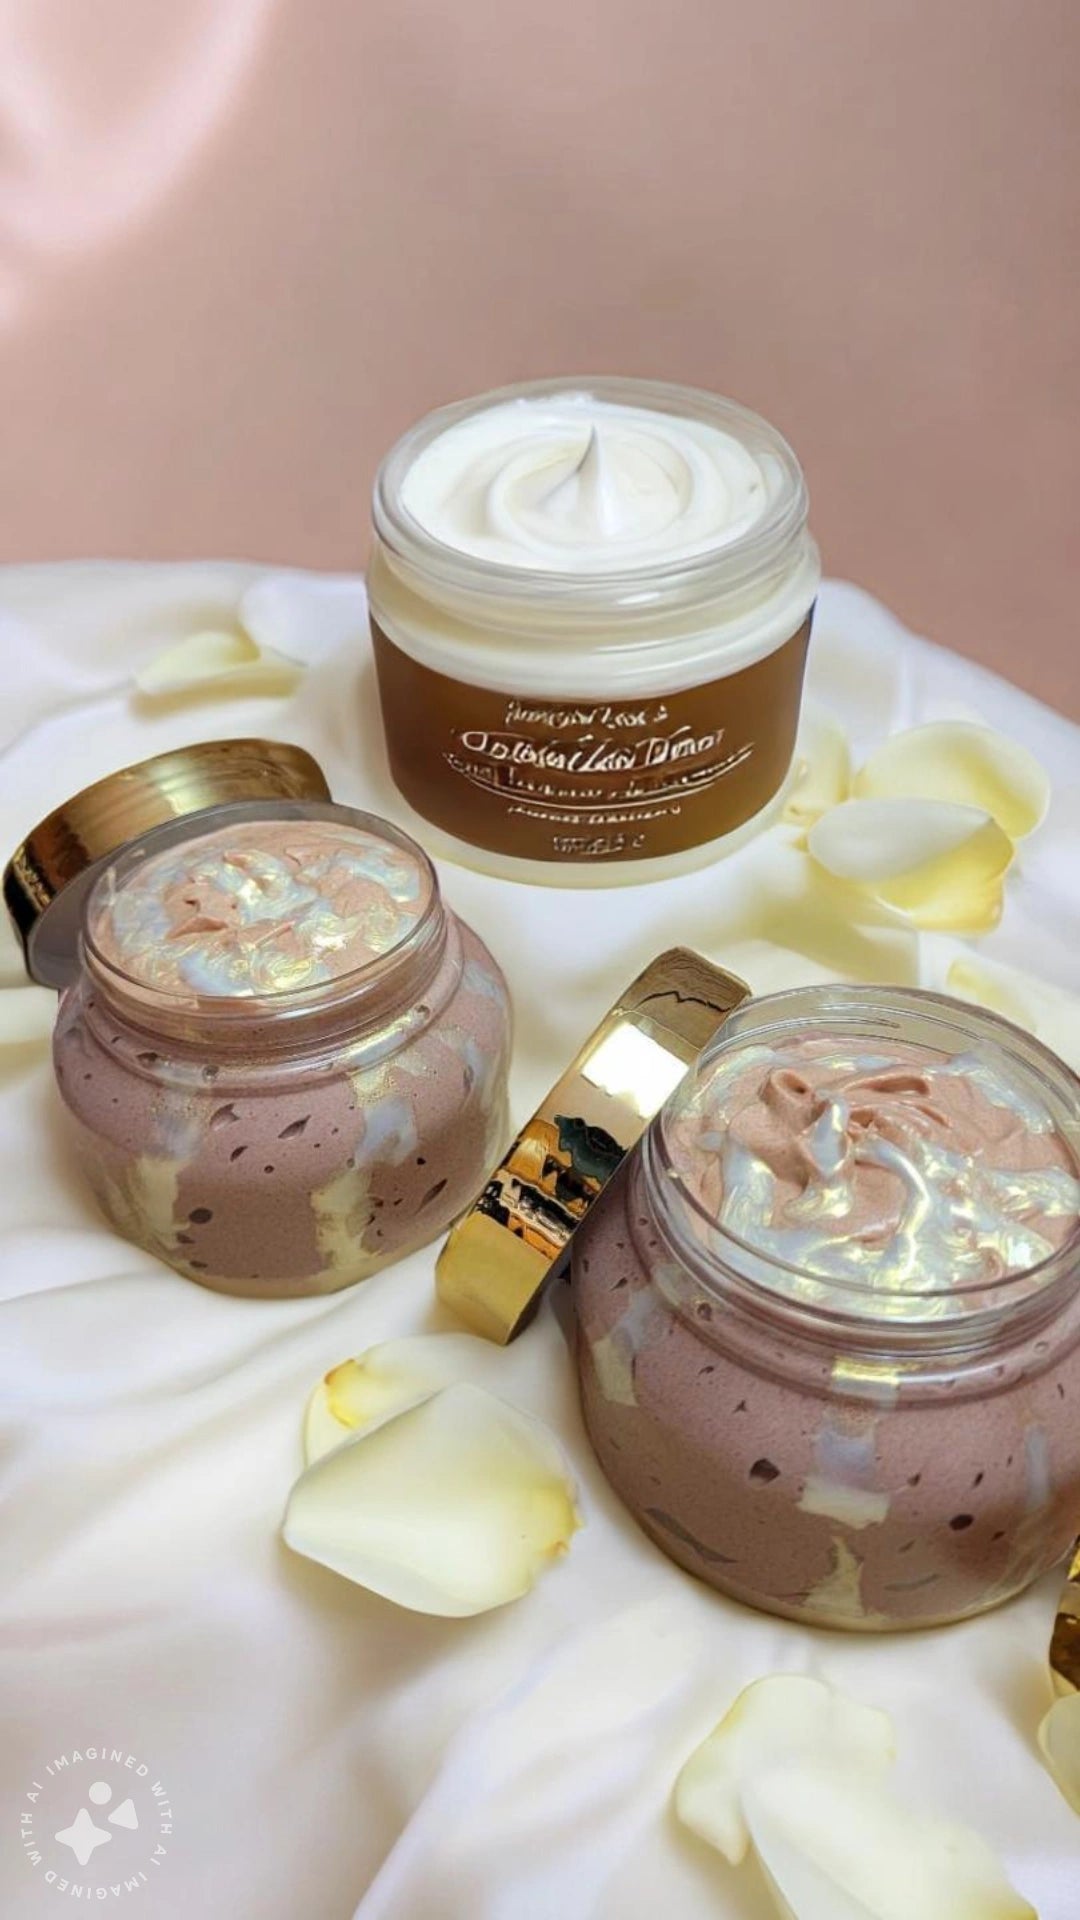 Cashmere Delight Whipped Body Butter!